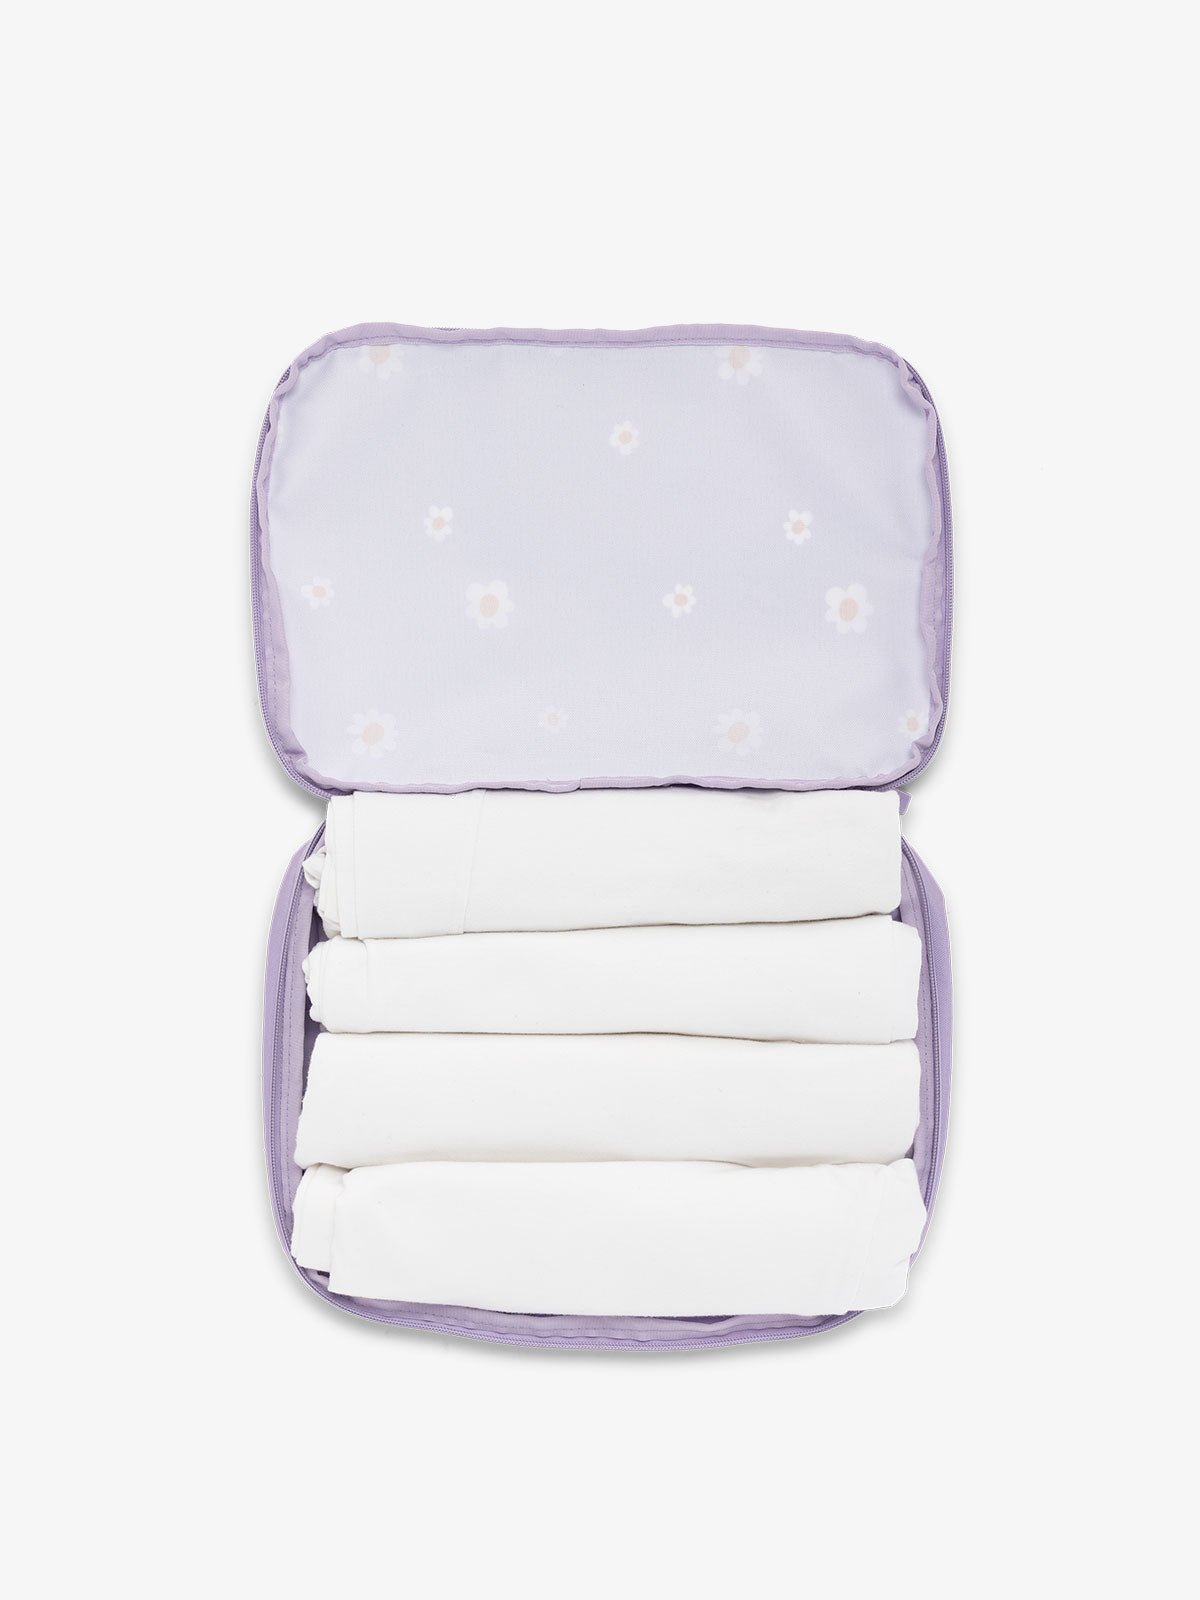 CALPAK packing cubes for travel in orchid fields lavender